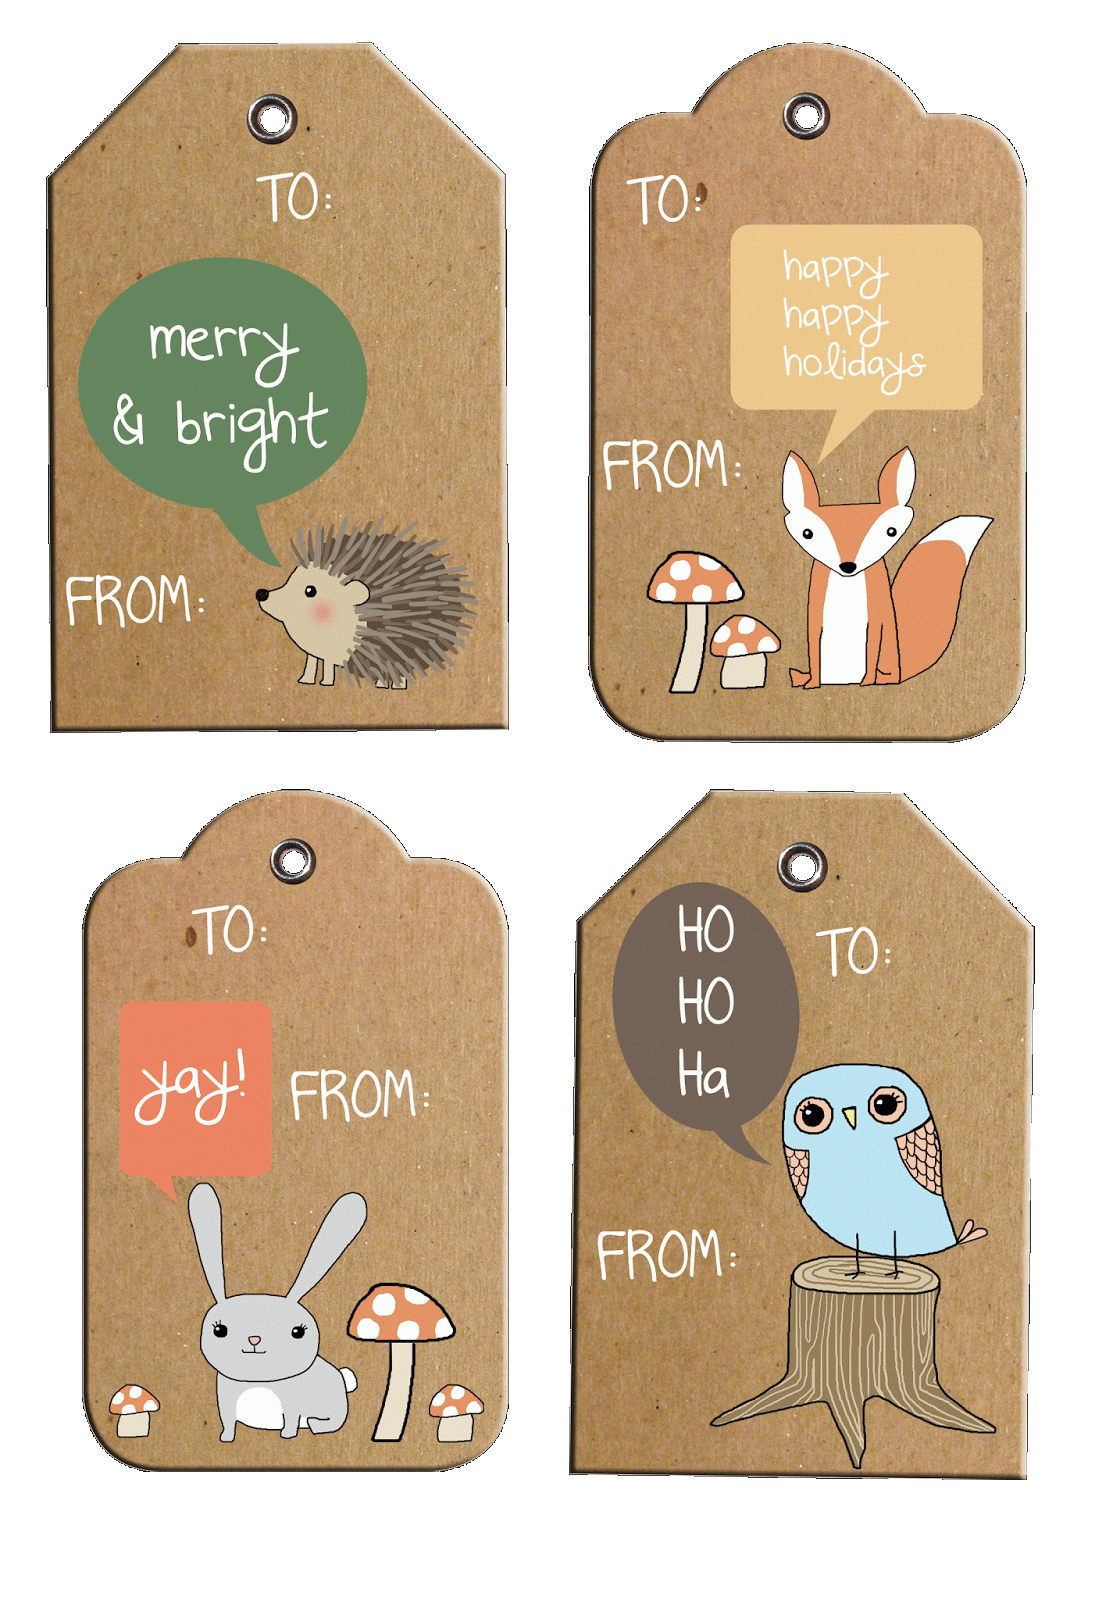 ashley-thunder-events-rustic-woodland-holiday-gift-tags-free-printable